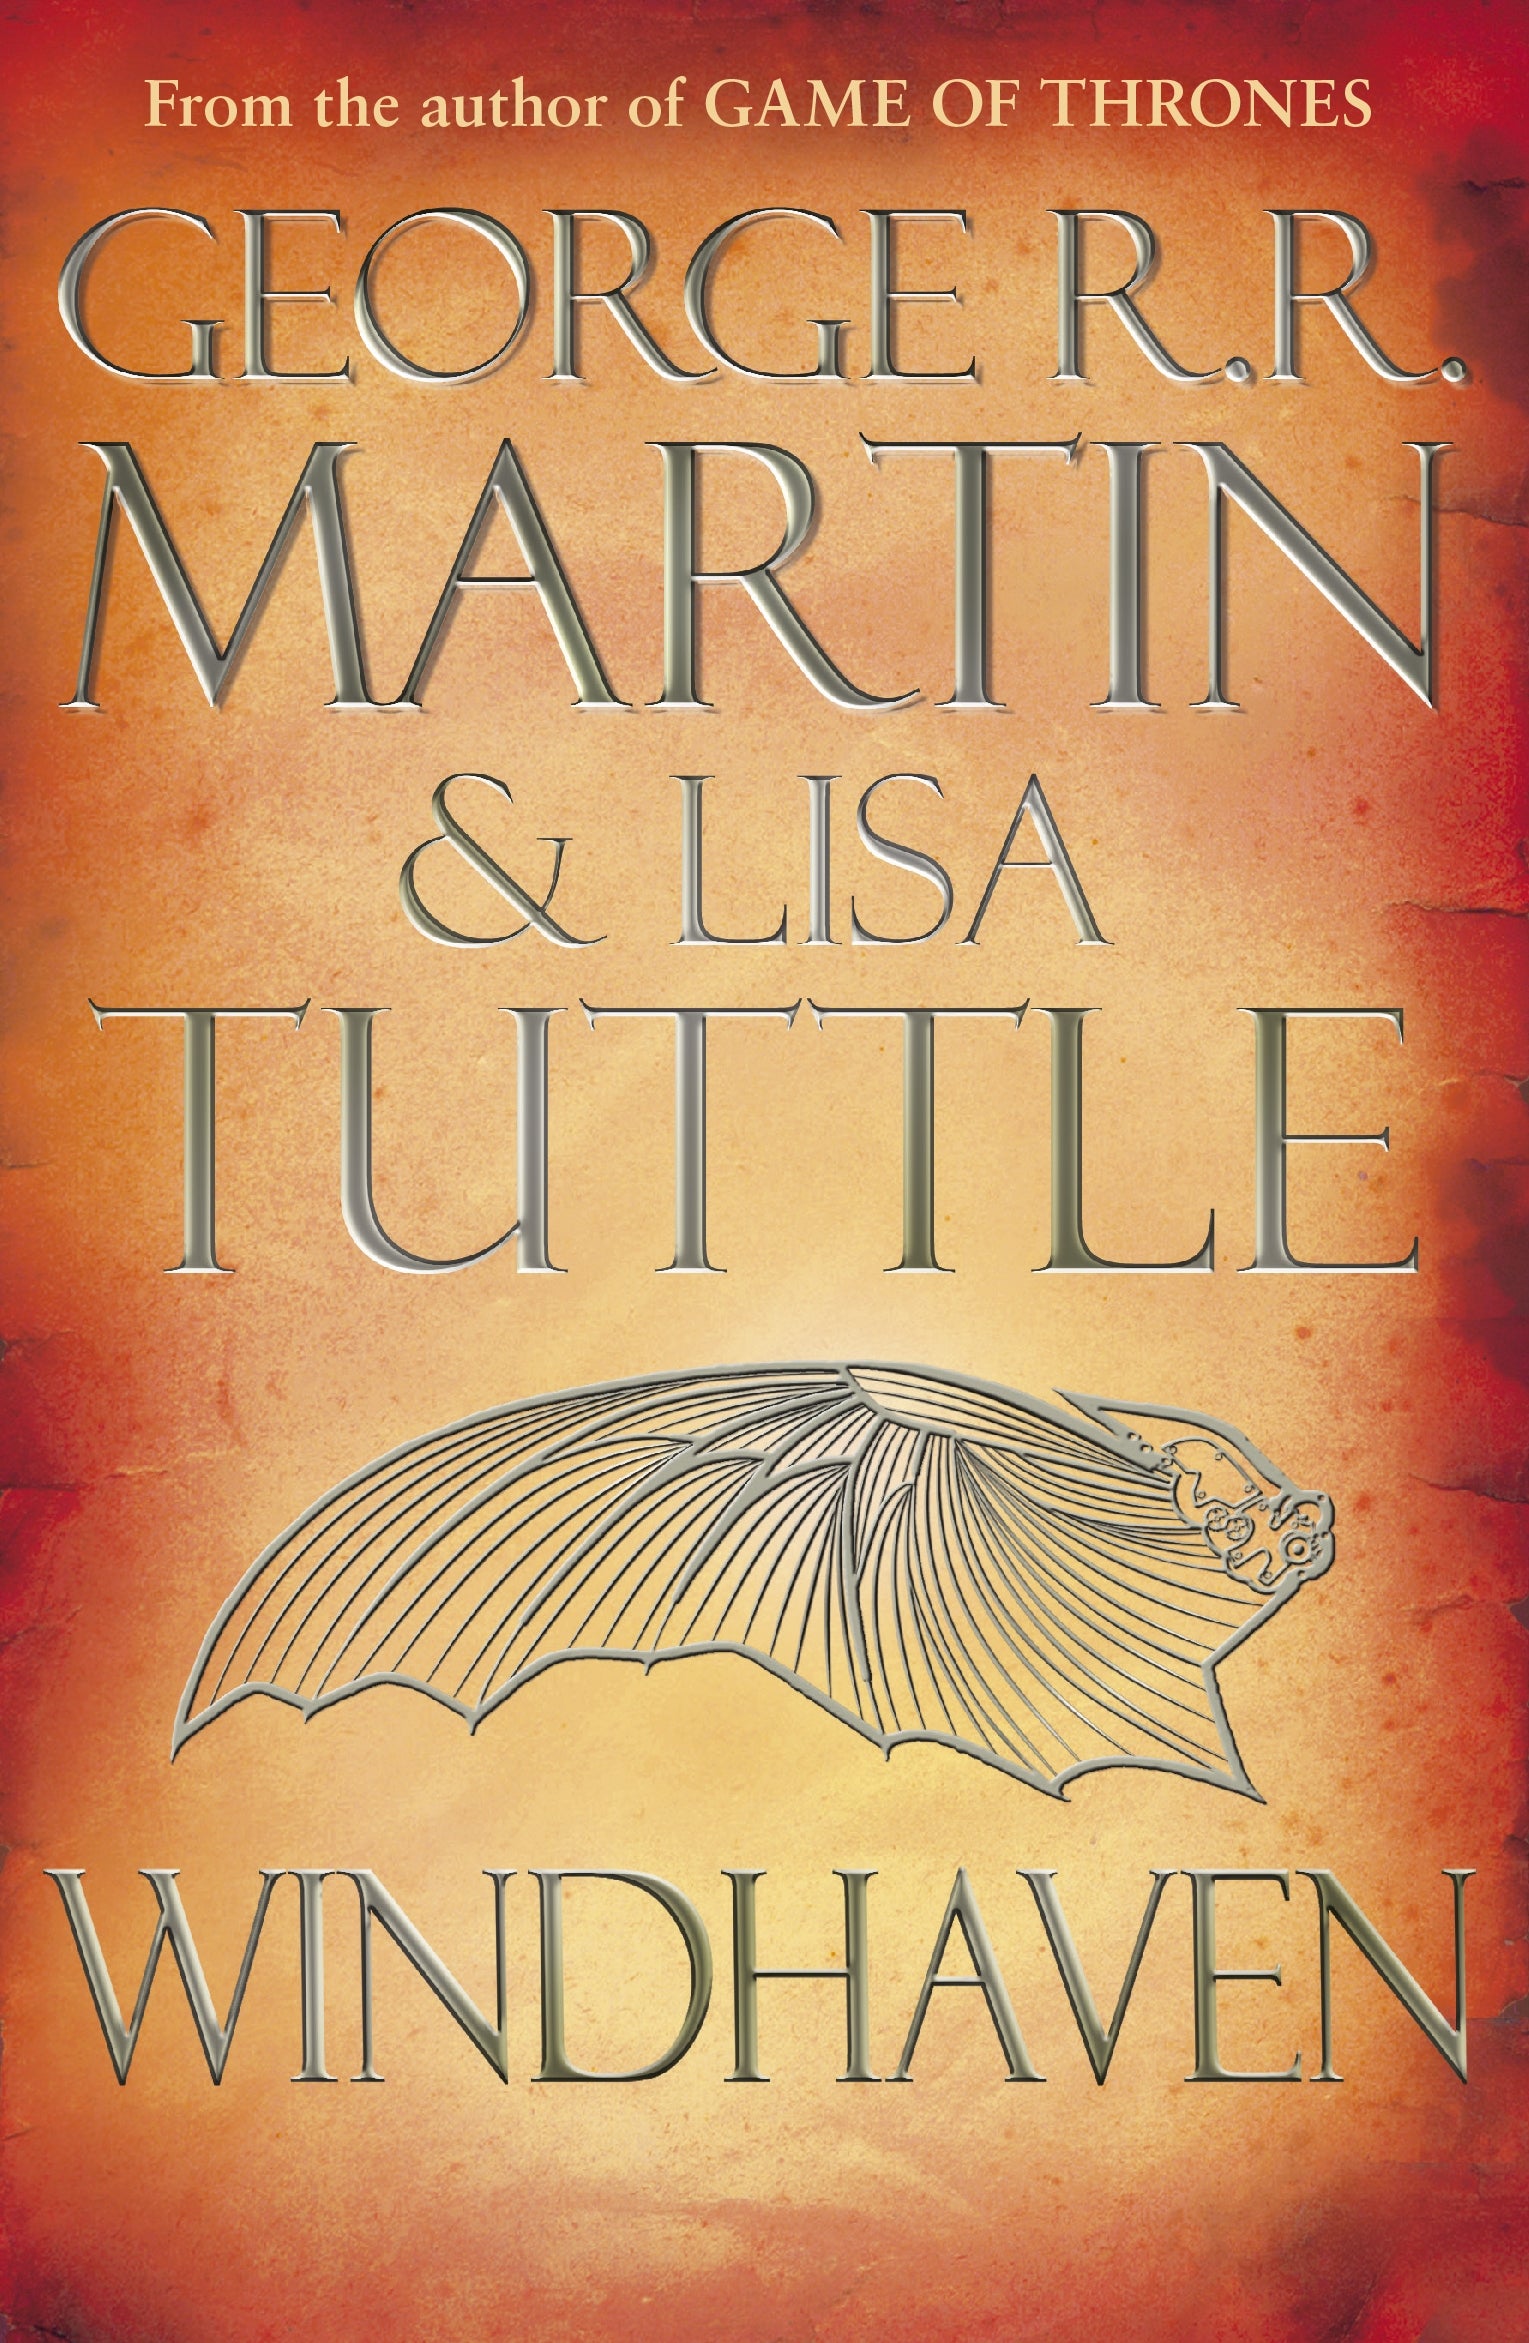 Windhaven by Lisa Tuttle, George R.R. Martin